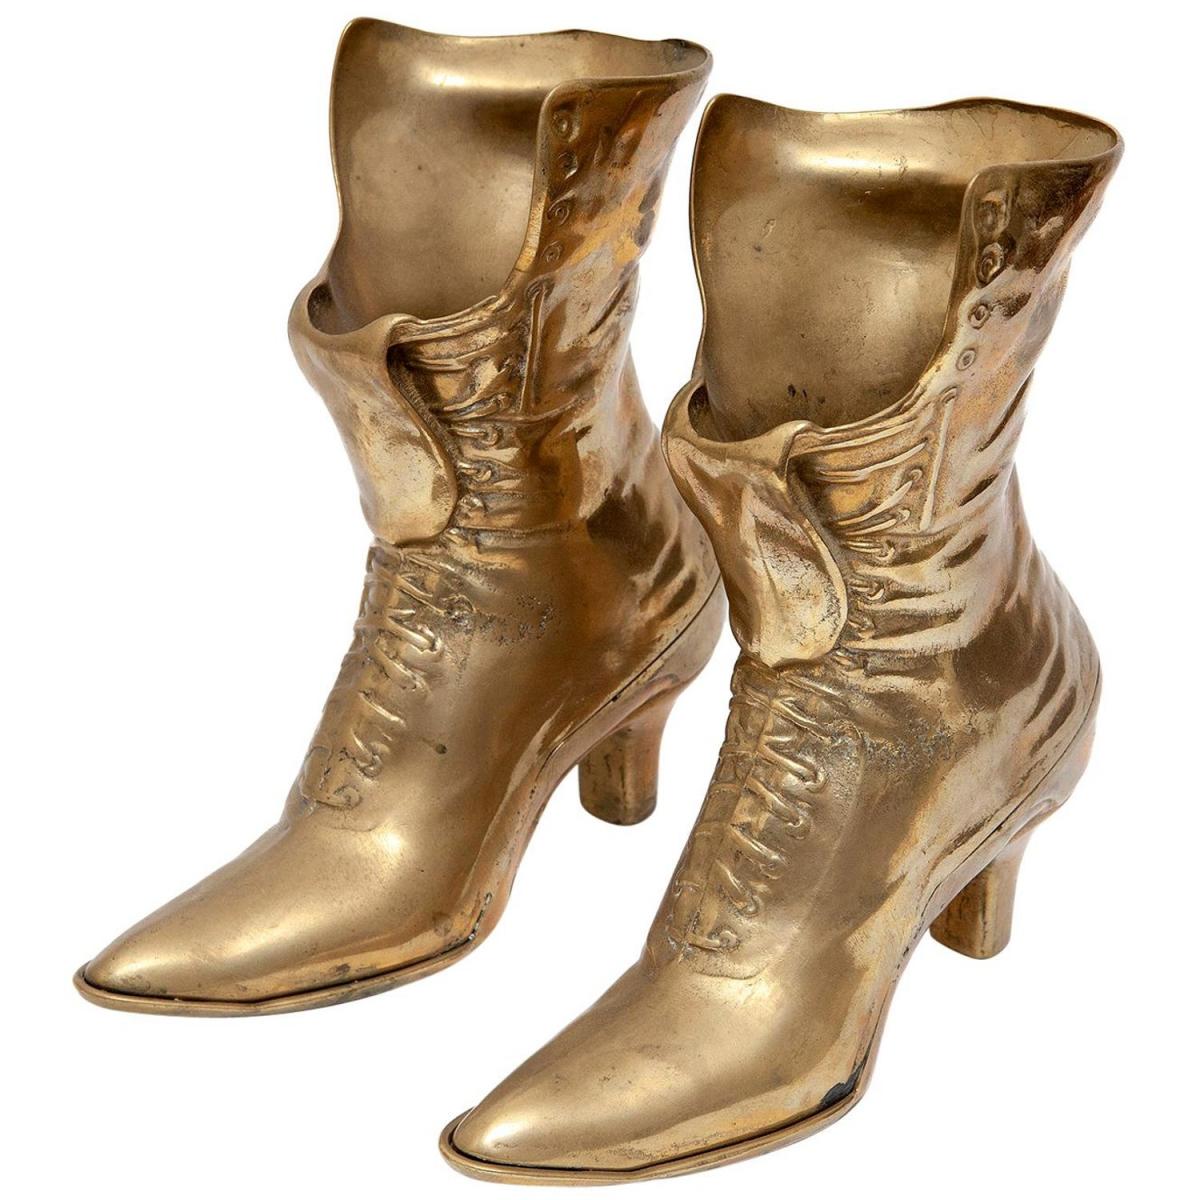 Vintage Victorian Style Brass Boot Ornaments | BADA